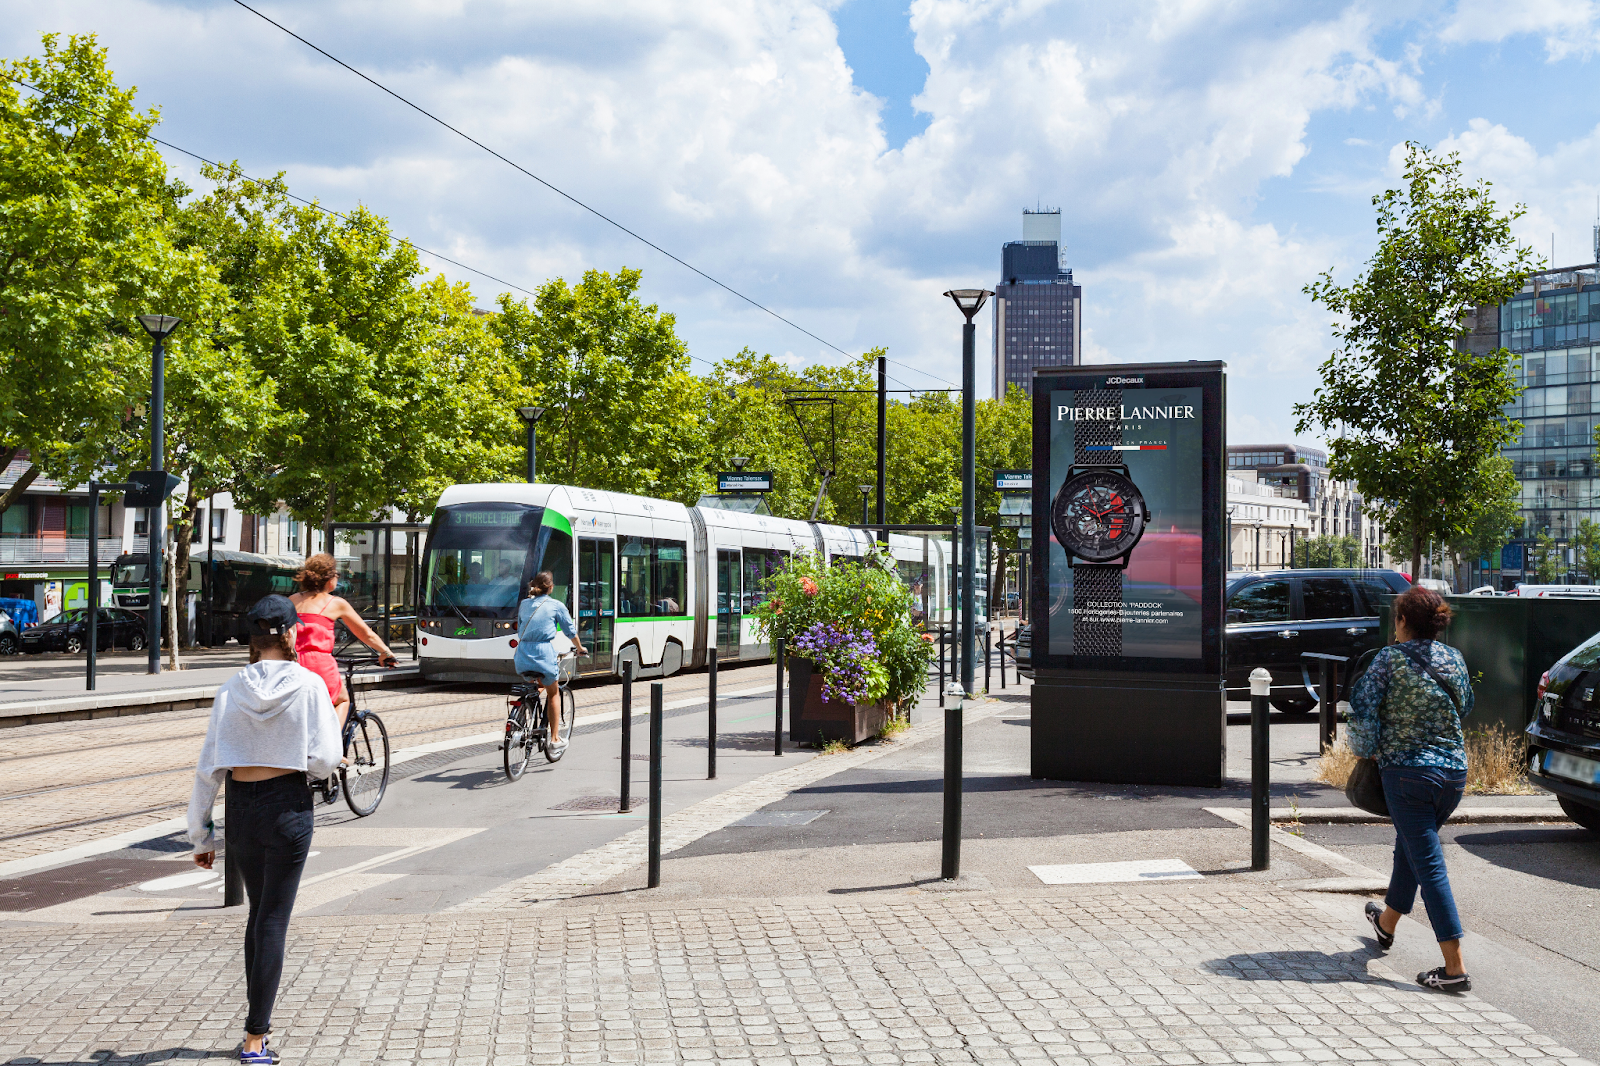 DOOH screen in the case of the pDOOH campaign of Pierre Lannier and near a tramway